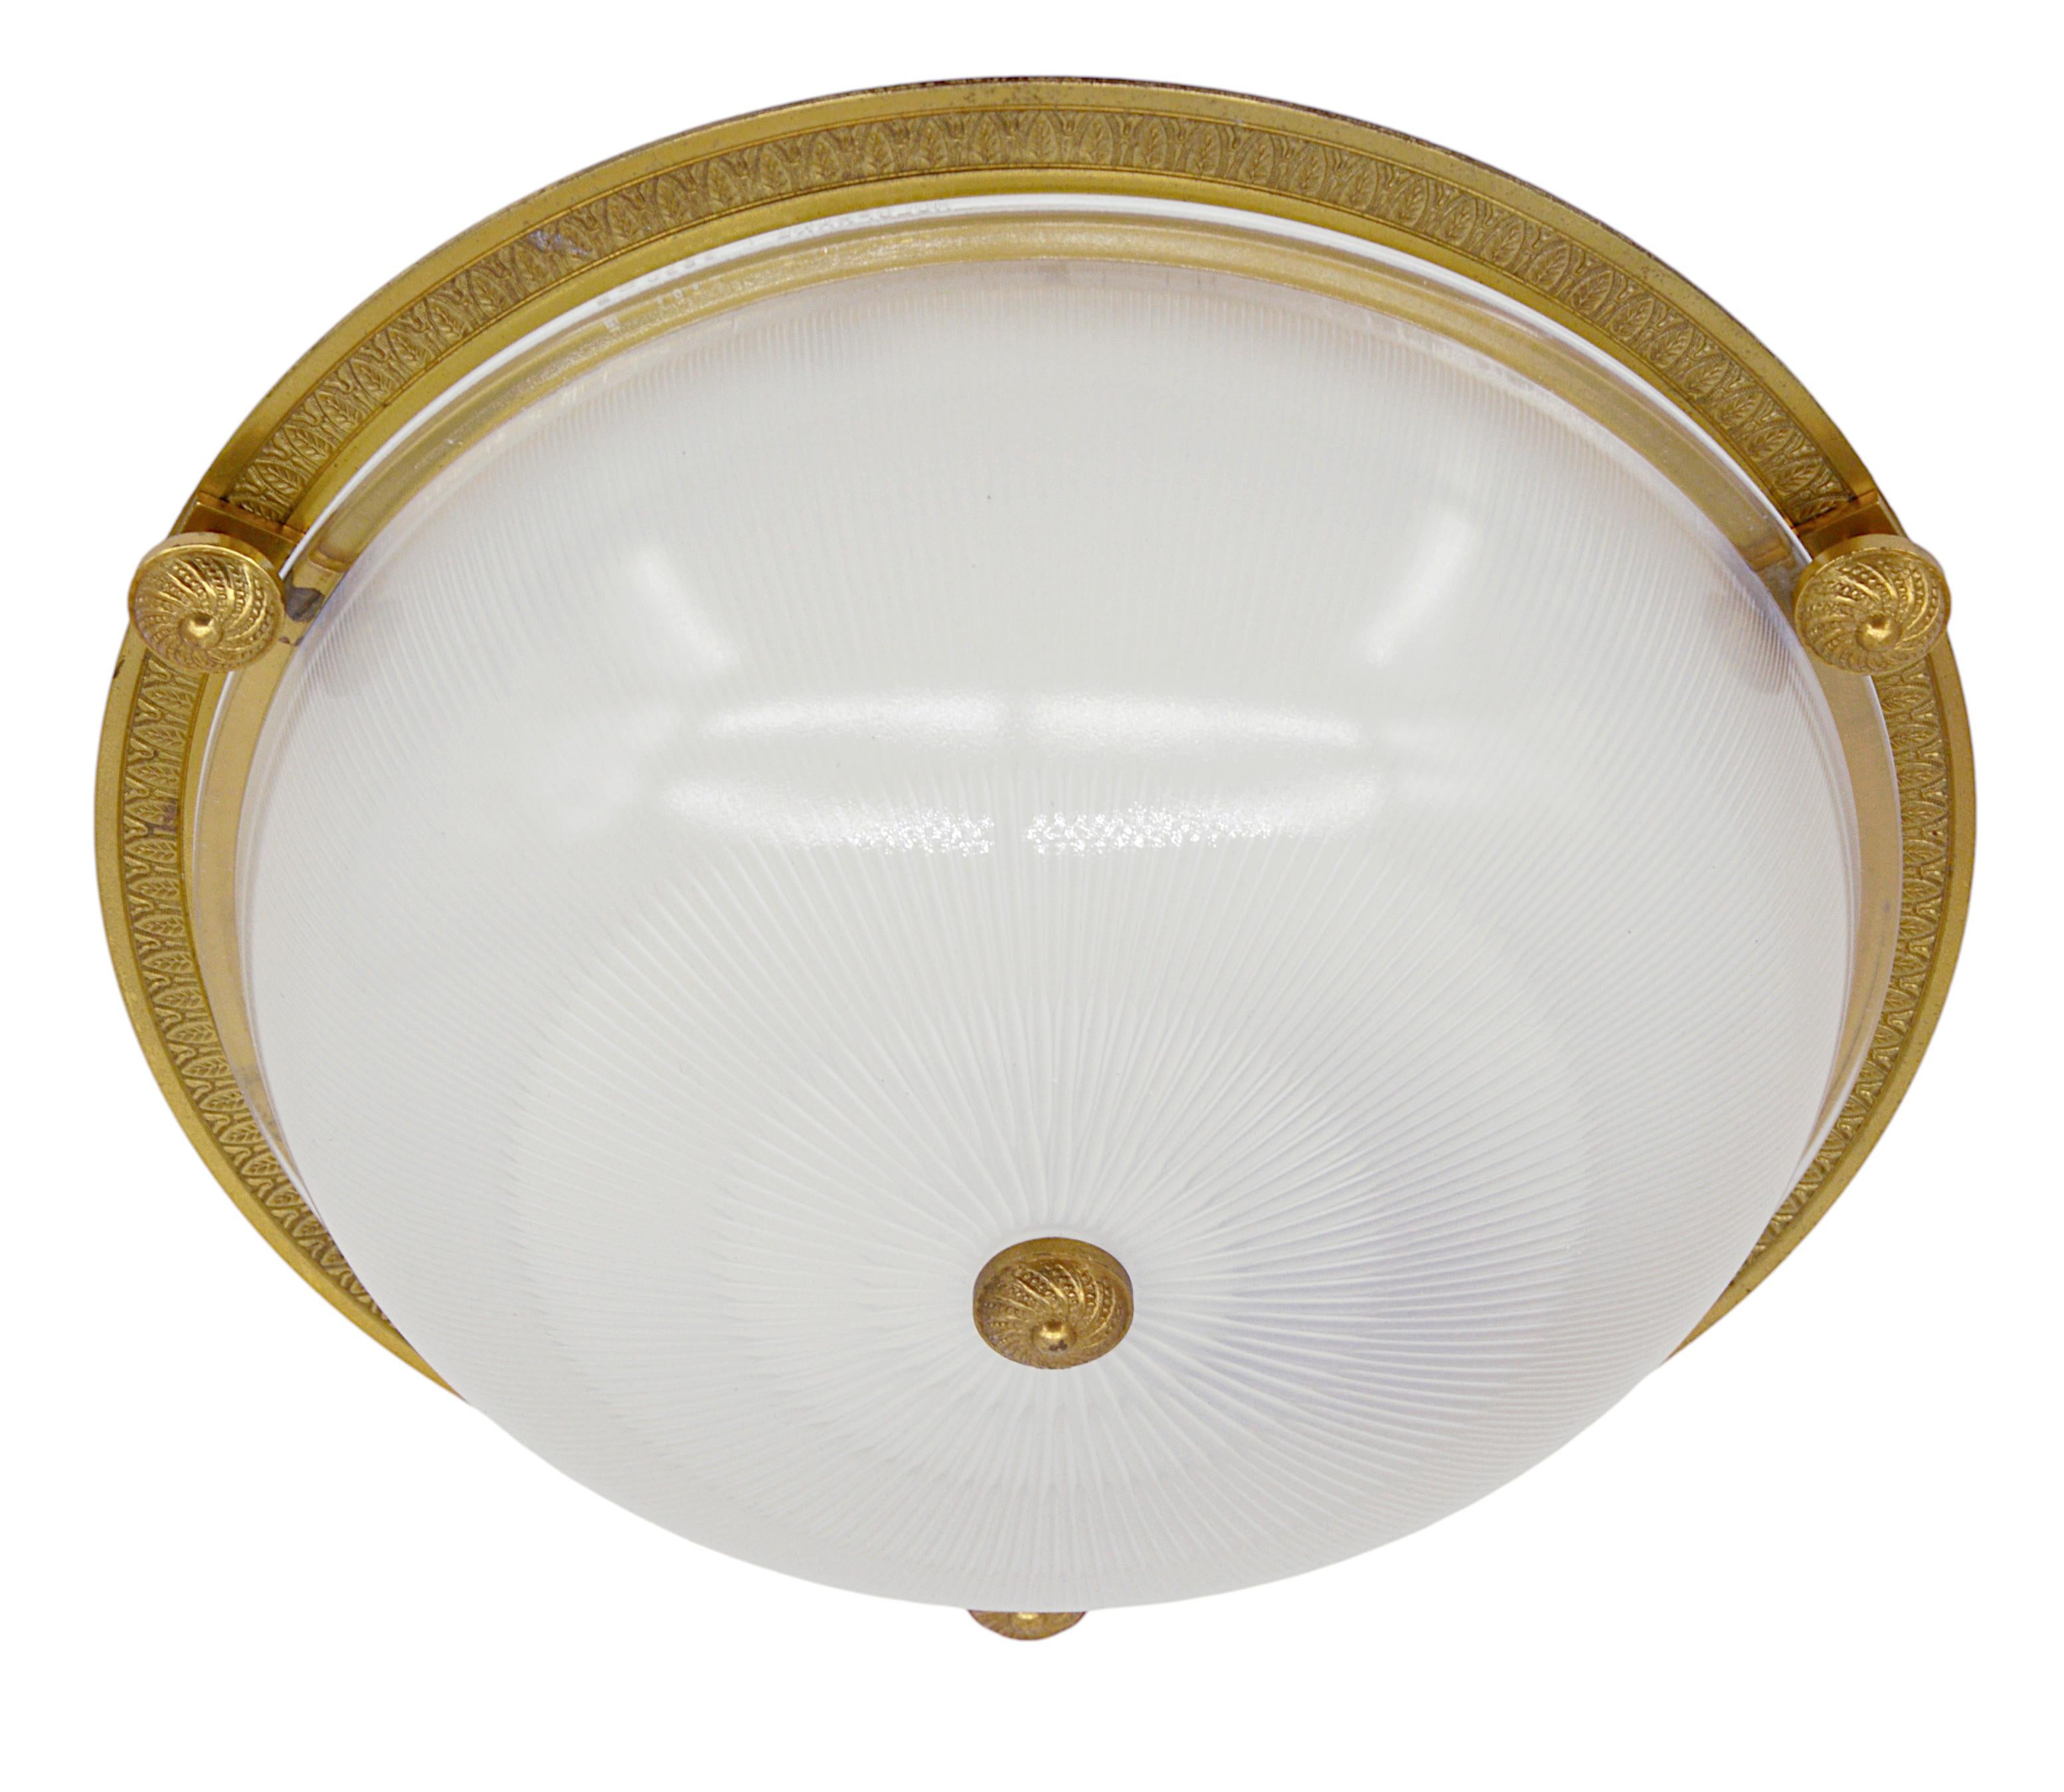 French Art Deco flush mount by Holophane (Les Andelys), France, 1930s. Ribbed molded glass and bronze. Height : 4